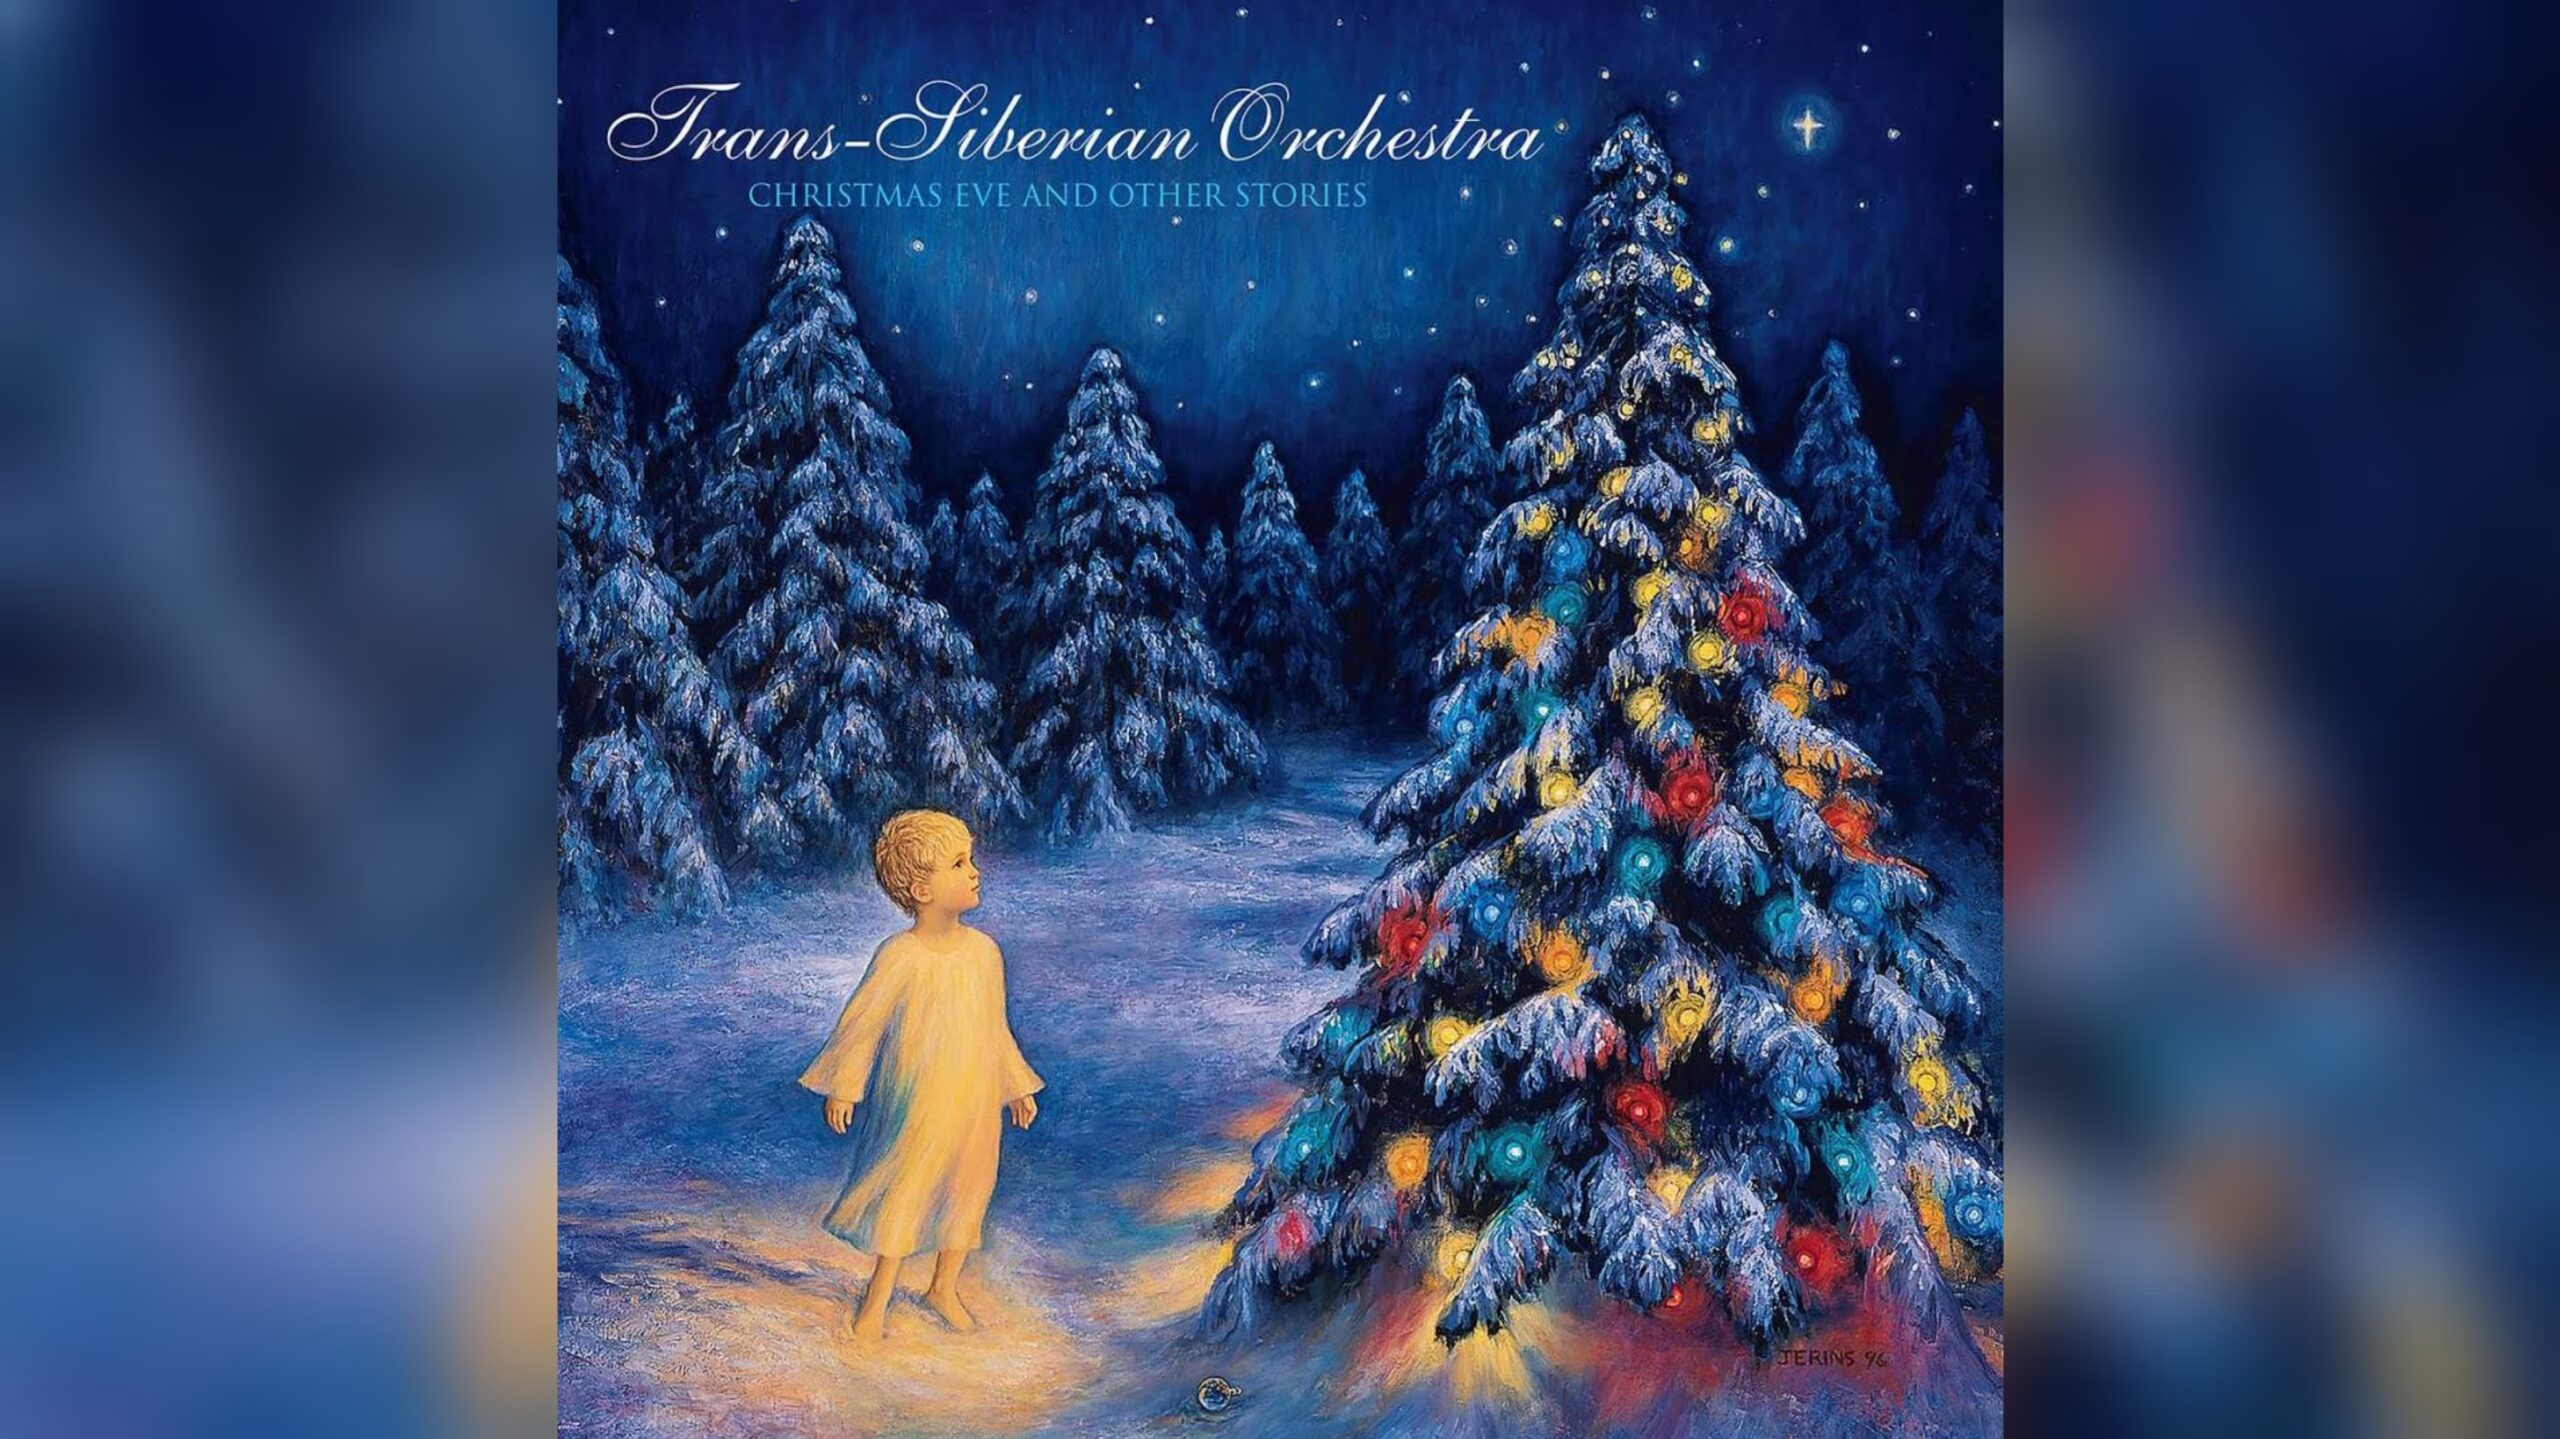 Cover for the album "Christmas Eve and Other Stories" by Trans-Siberian Orchestra 